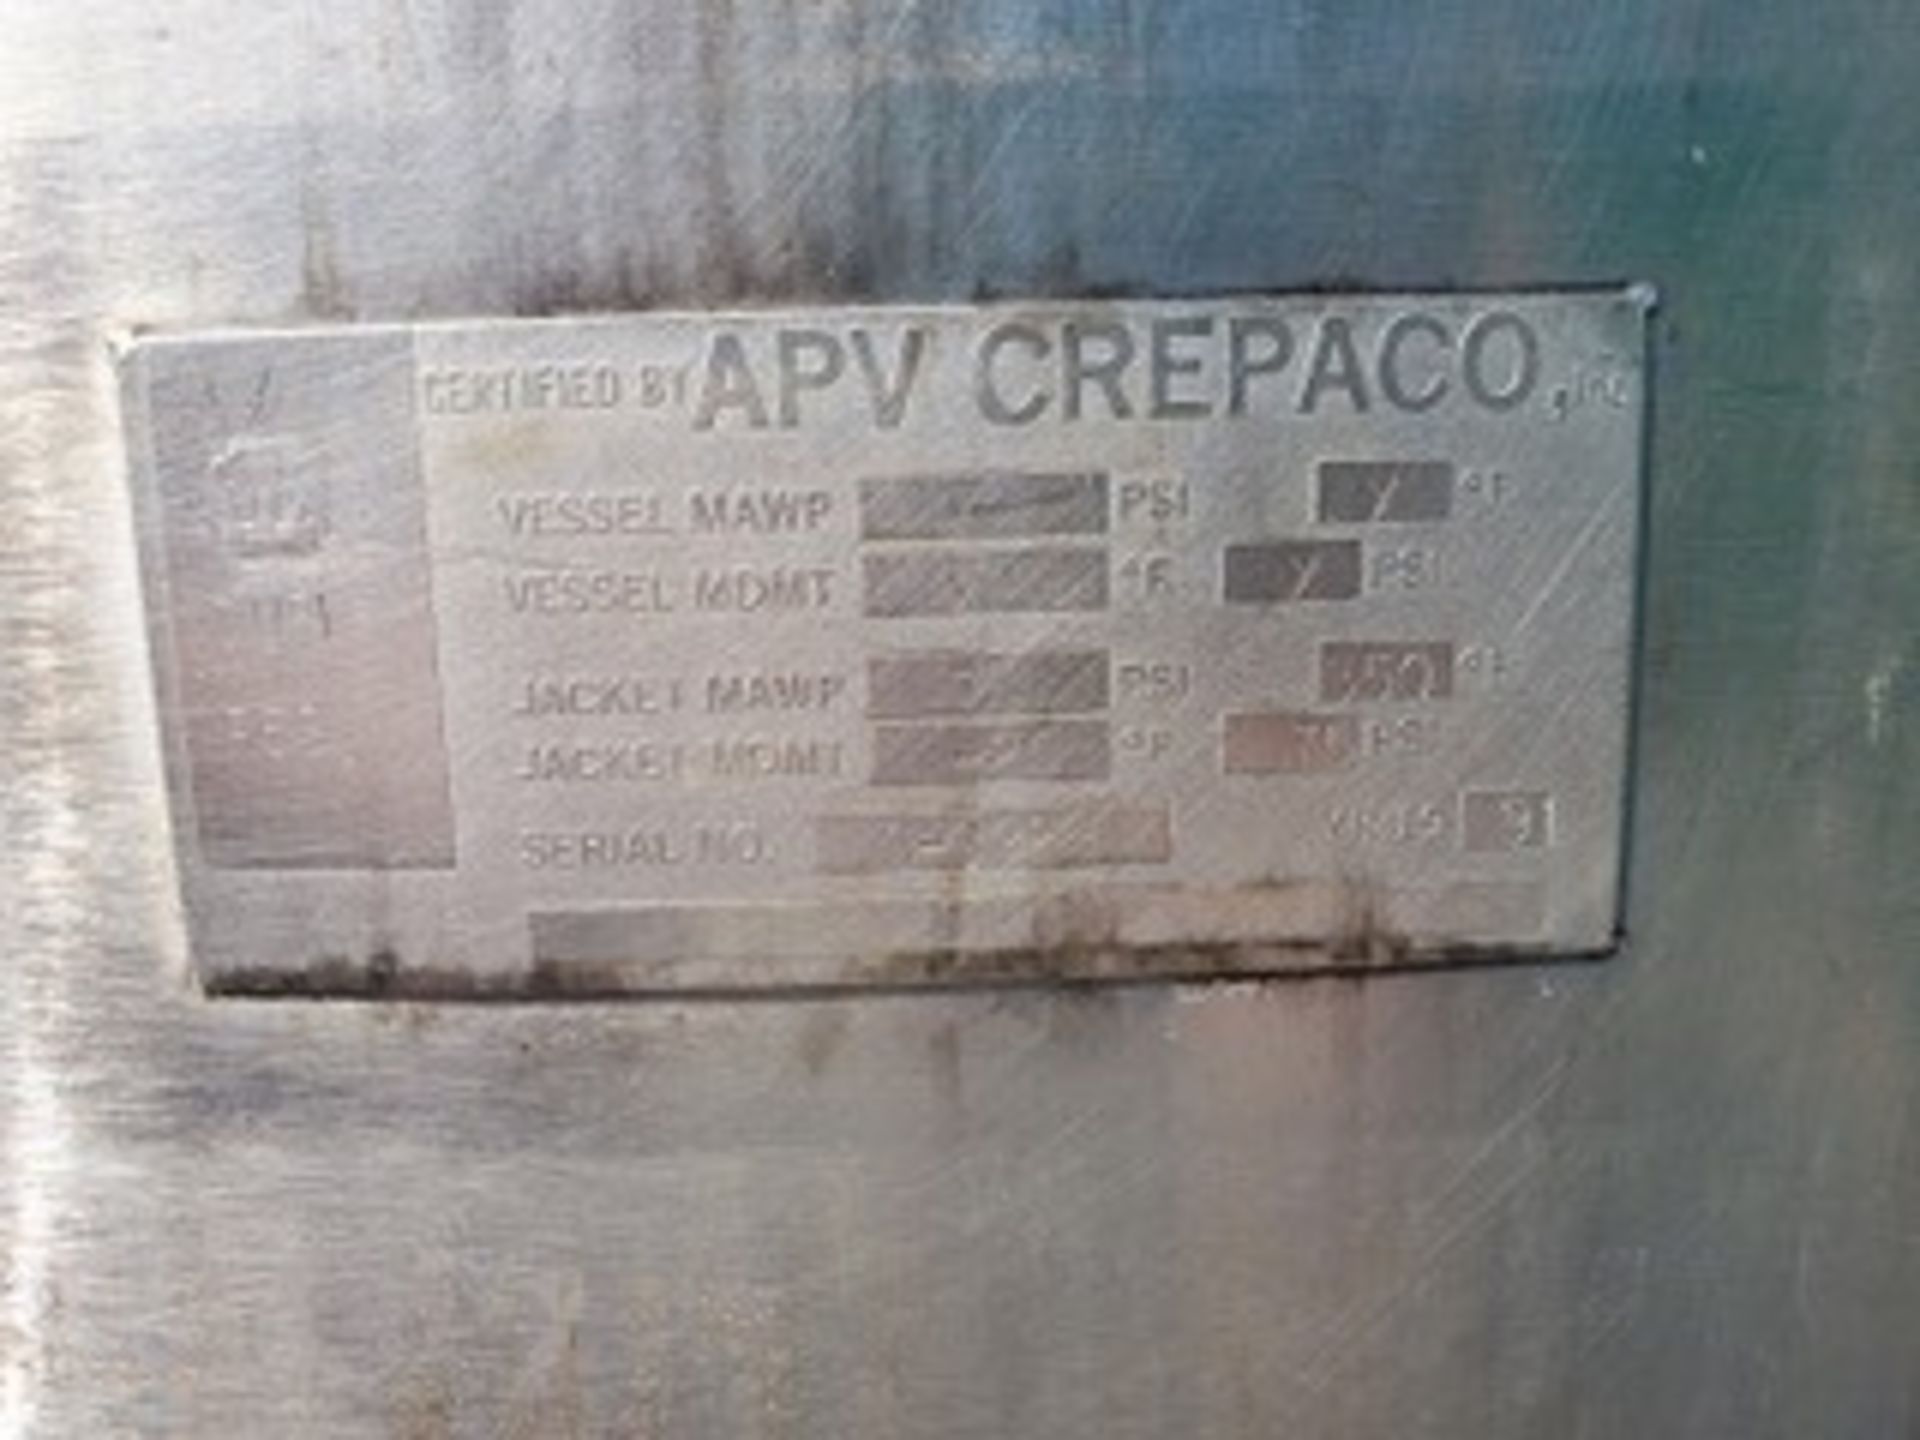 APV CREPACO 300 Gal MIX TANK- Jacketed - Max 75 PSI — 350º F Max Temp. 14" Impeller — 2 3/8 " in - Image 8 of 8